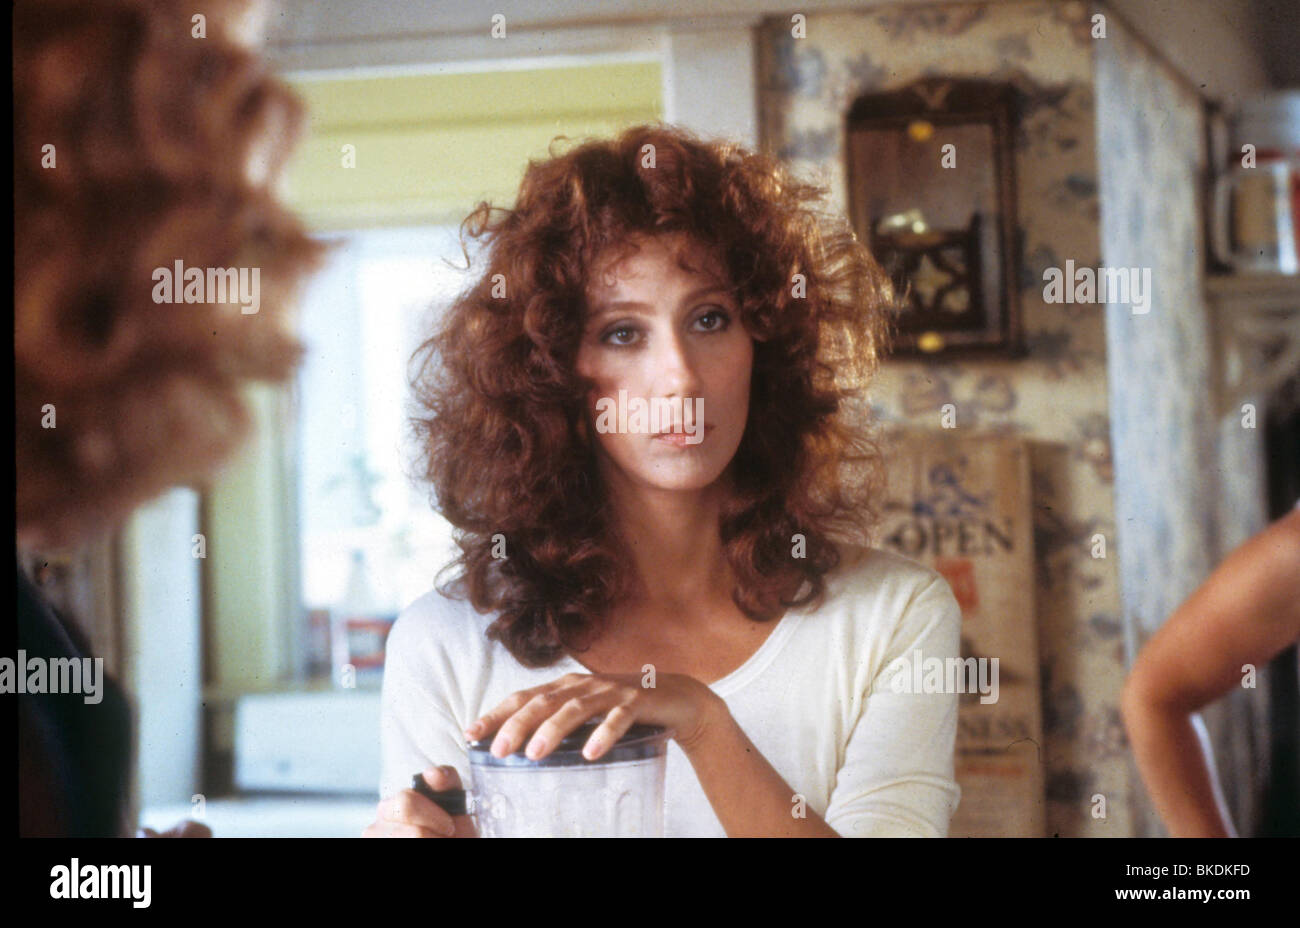 Mask 1985 Cher High Resolution Stock Photography and Images - Alamy